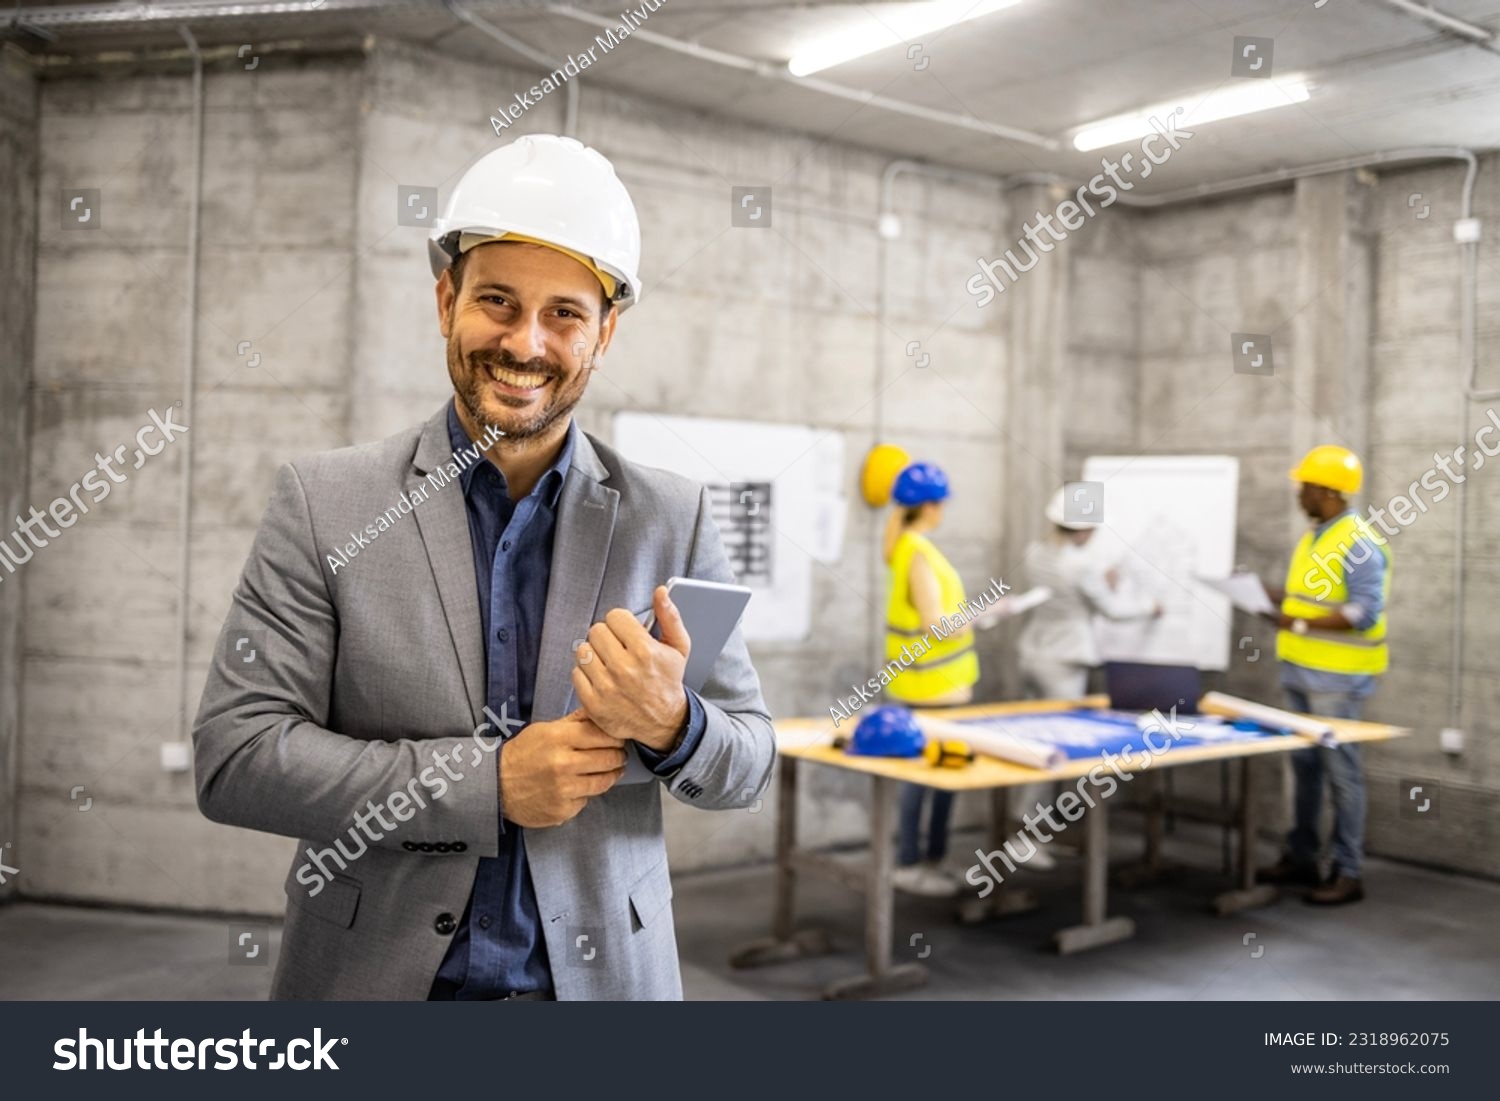 Portrait of structural engineer in business suit and hardhat holding tablet computer at construction site. #2318962075